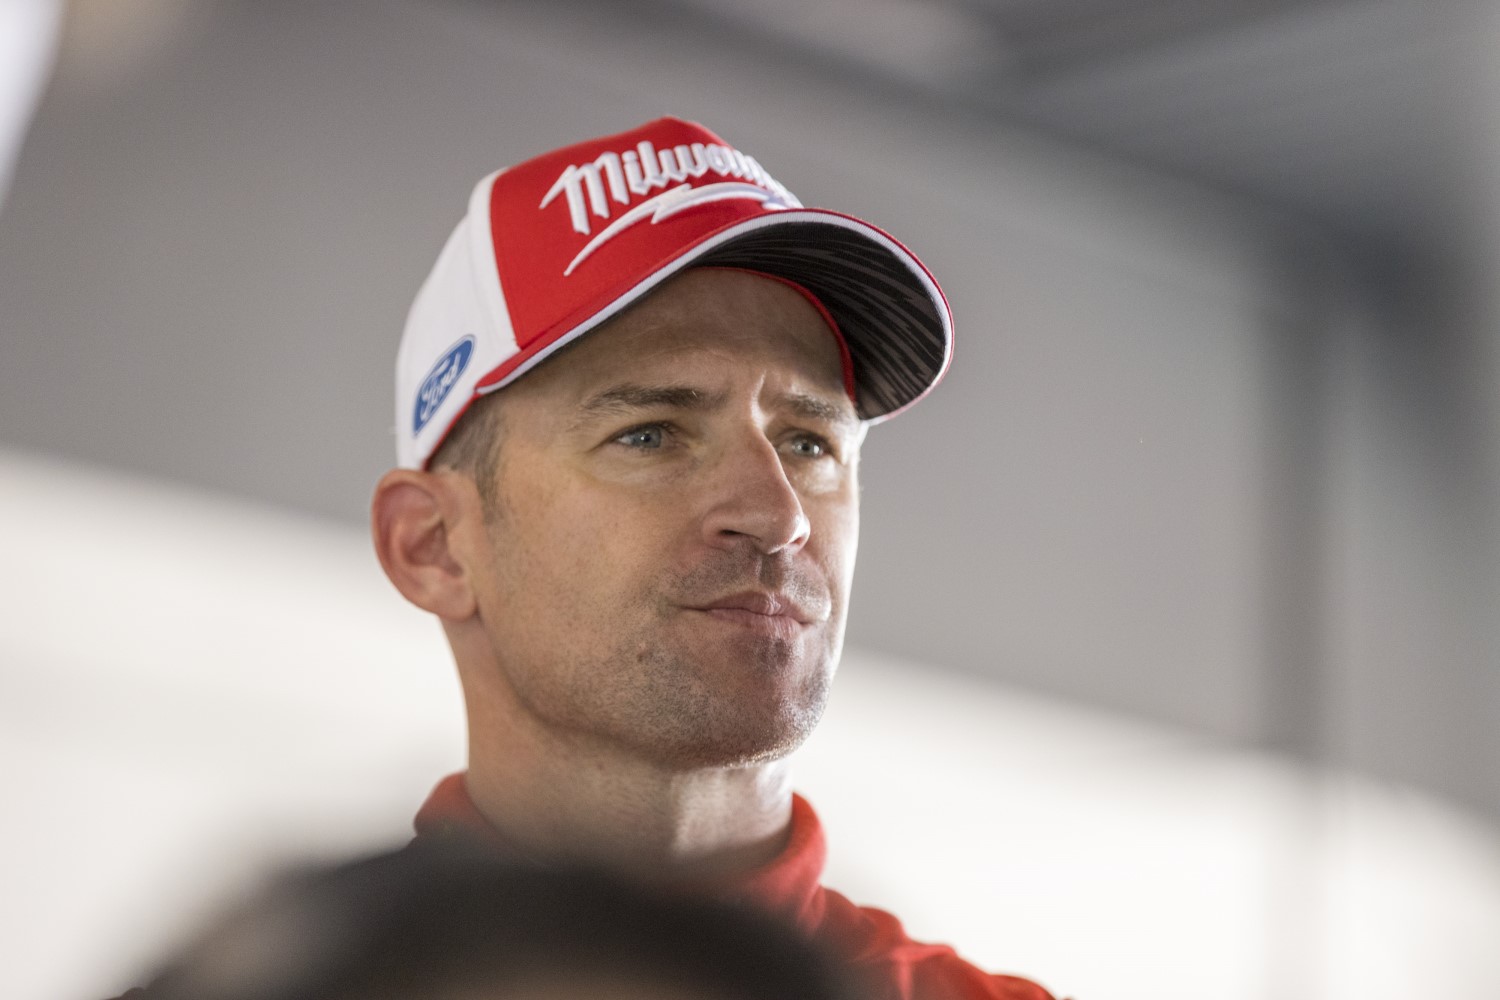 Quickest when it does not count - Will Davison